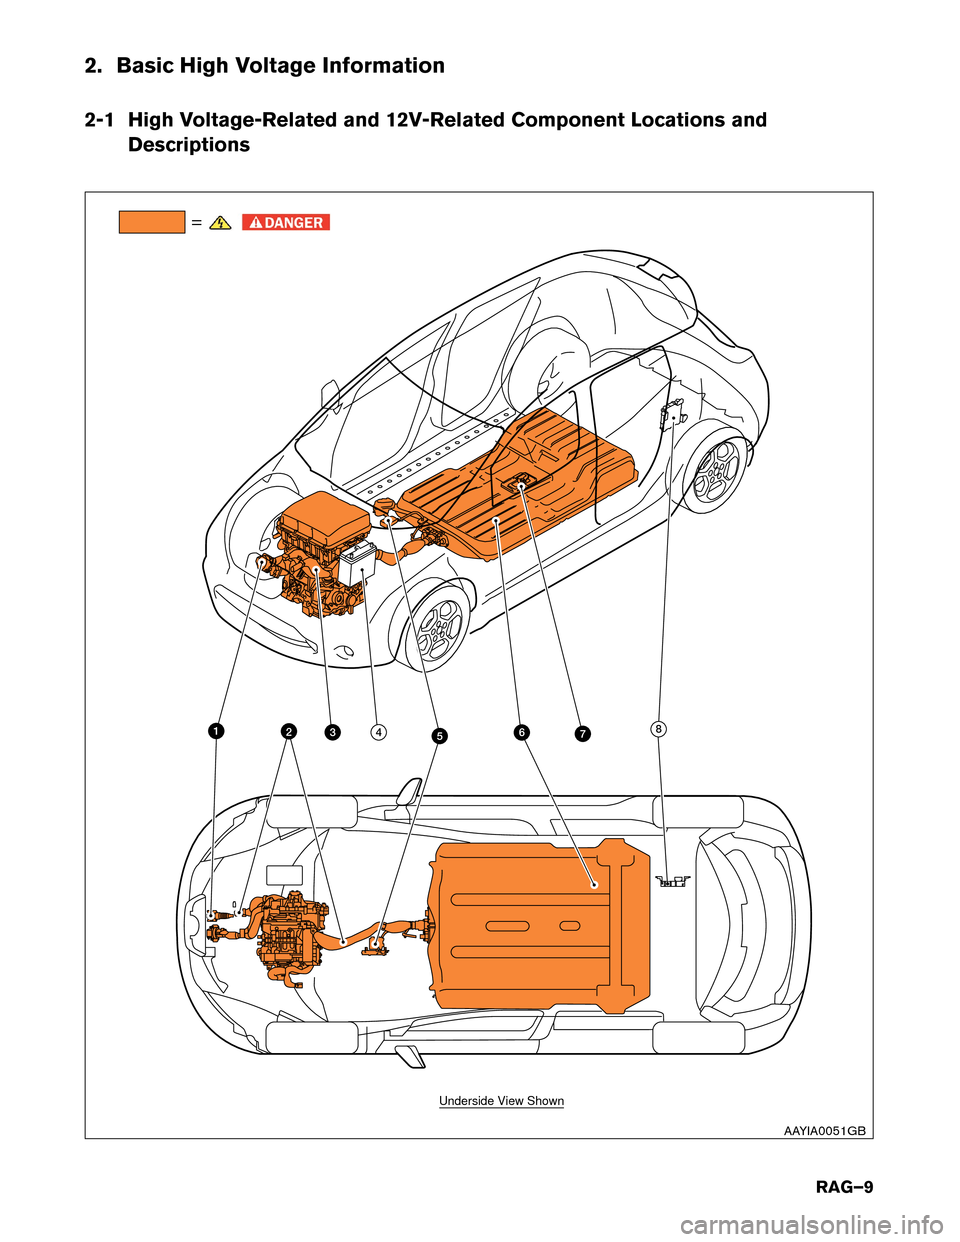 NISSAN LEAF 2014 1.G Roadside Assistance Guide 2. Basic High Voltage Information
2-1
High Voltage-Related and 12V-Related Component Locations and
Descriptions =
76
342 8
5 1
Underside View Shown
AAYIA0051GB
RAG–9  